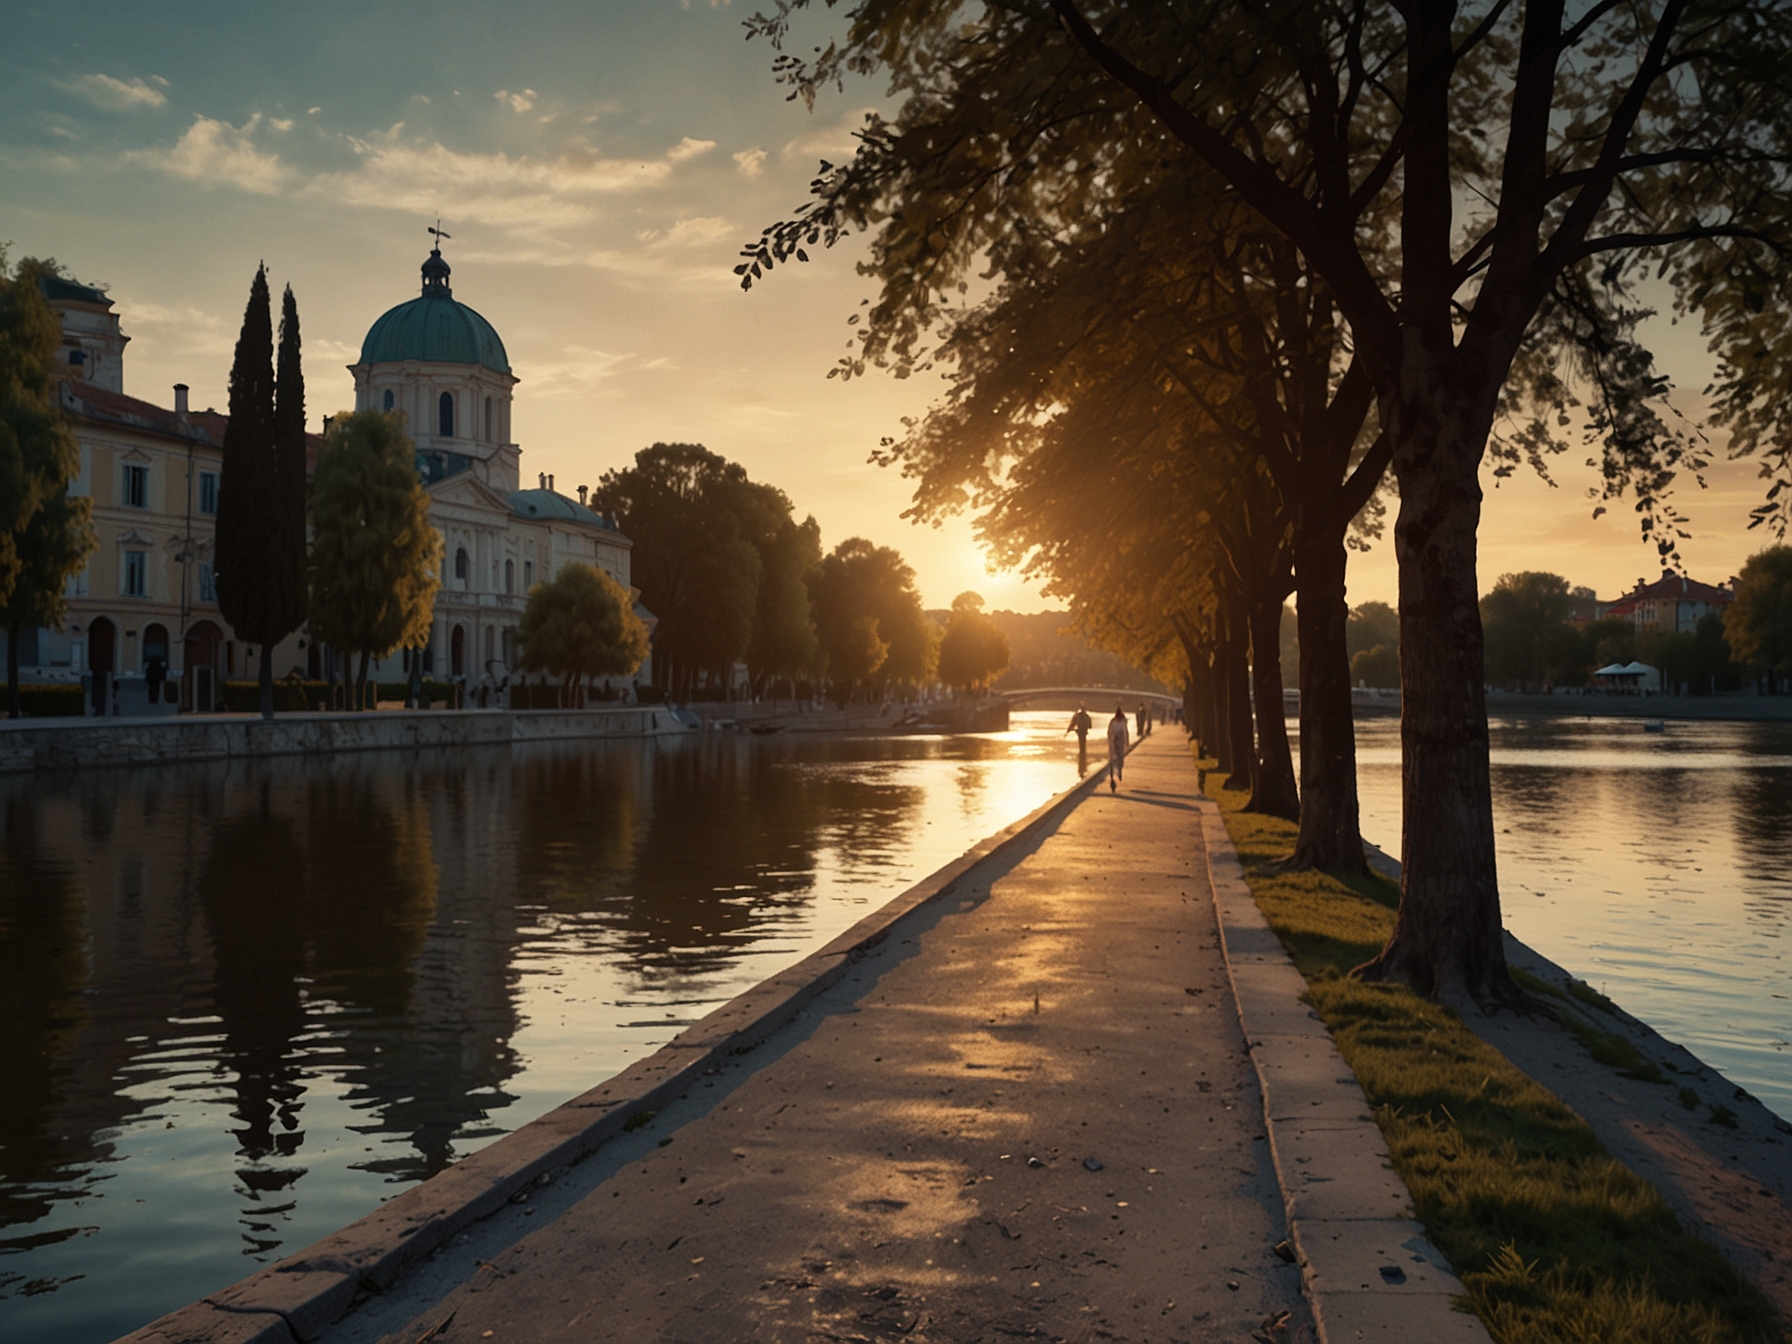 A picturesque scene of the River Po at sunset, with the tree-lined promenade and Parco del Valentino in the background. The tranquil setting highlights the natural beauty surrounding the city.